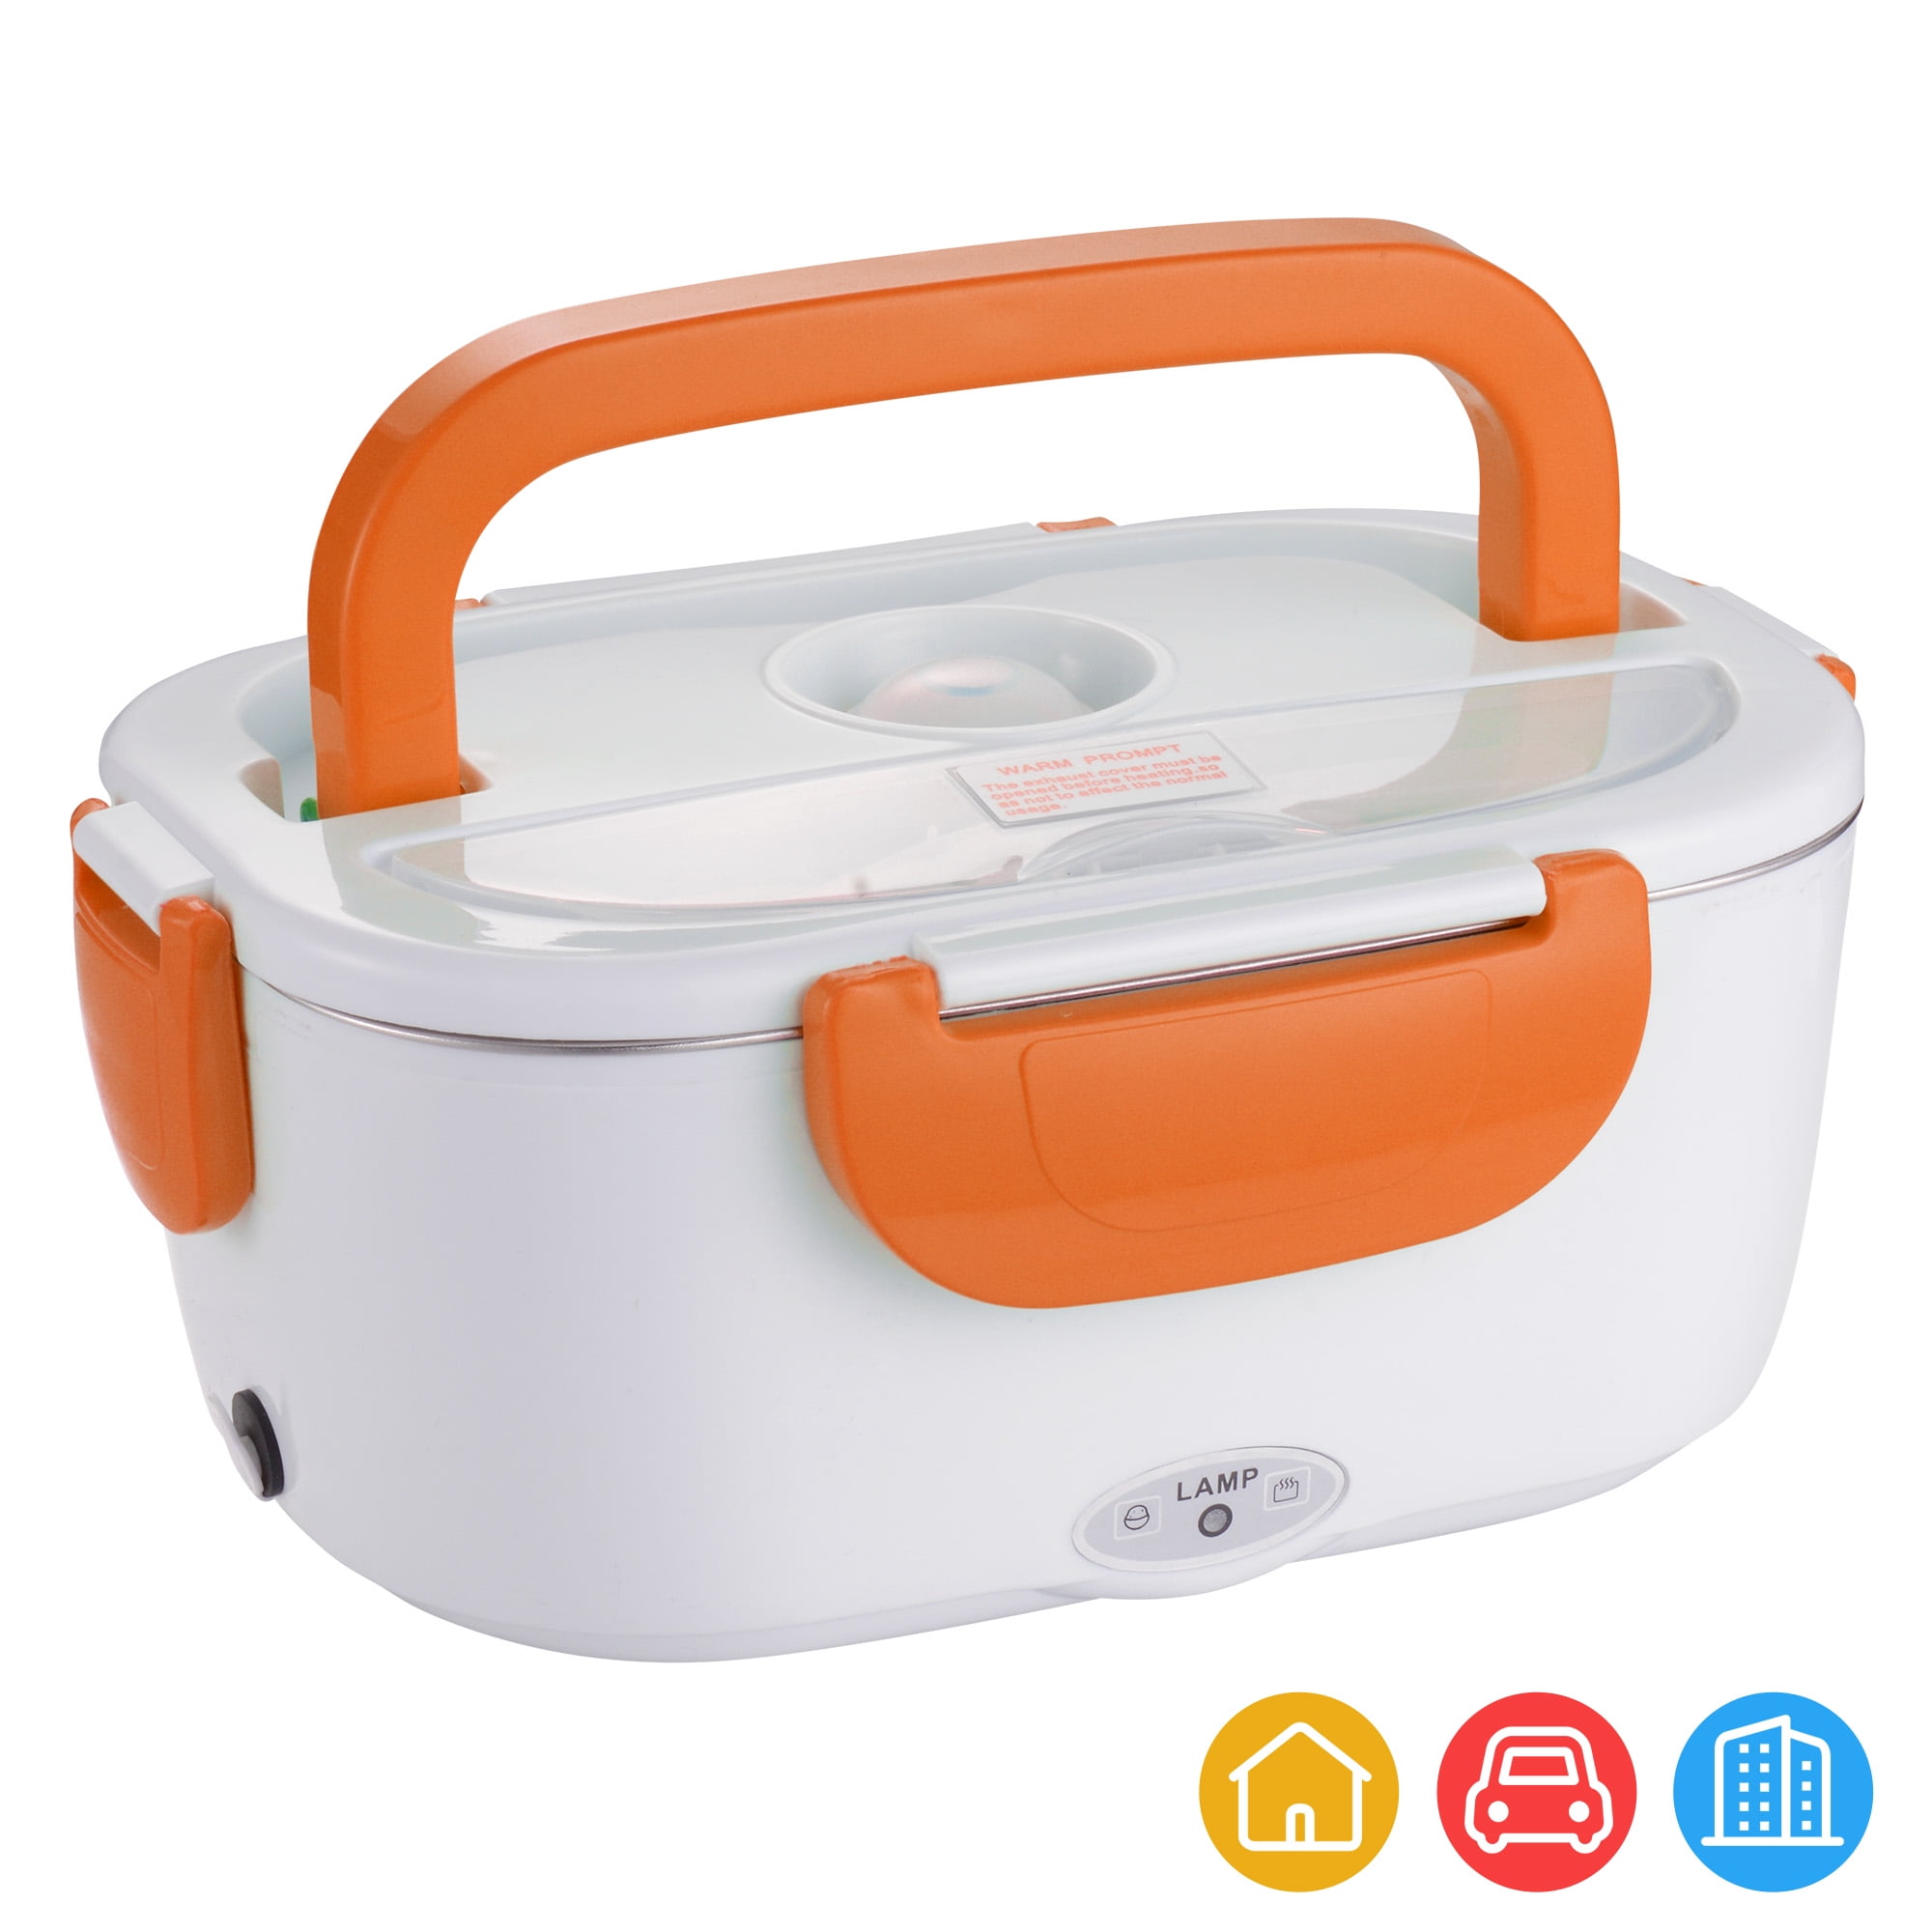 Best Electric Lunch Boxes & Food Warmer Boxes From $34.90 For Warm Food On  The Go – Including One That Over 2,000 Shoppers Love